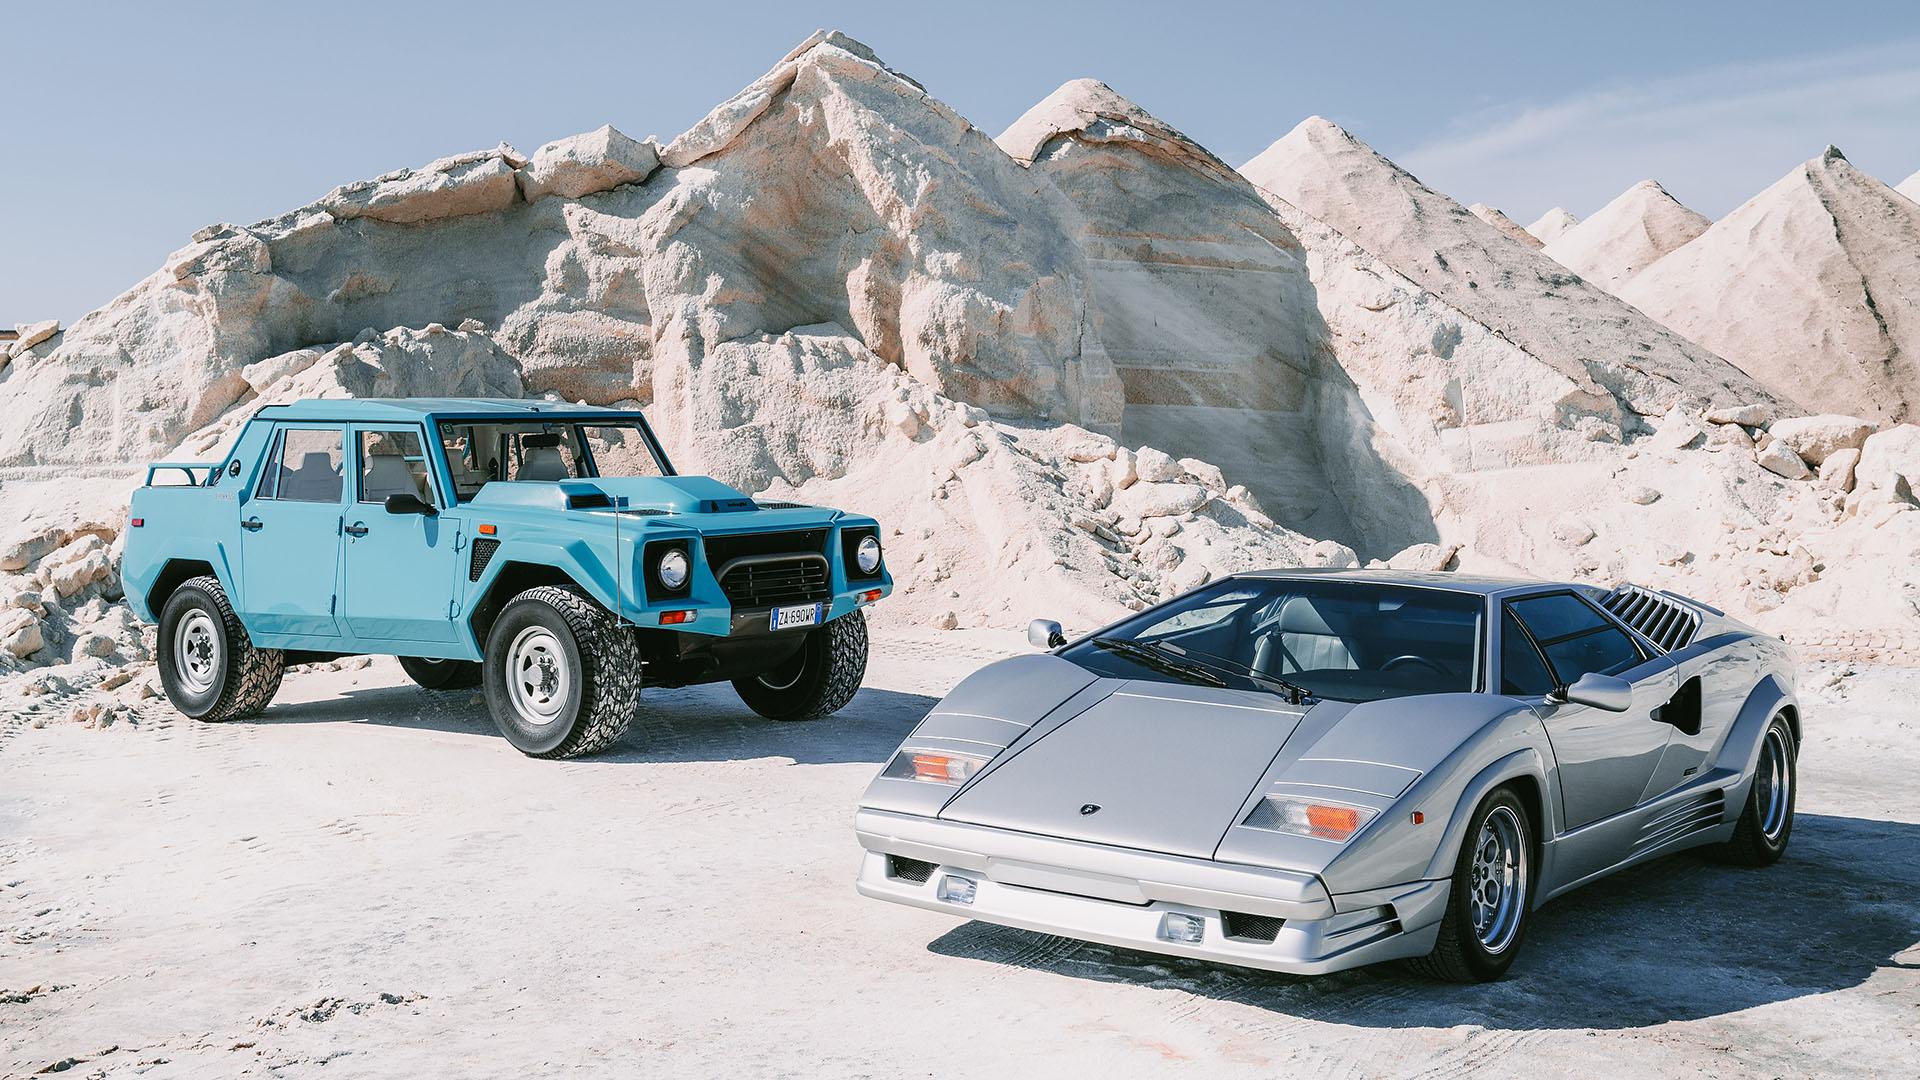 Countach and lm002 v12 3